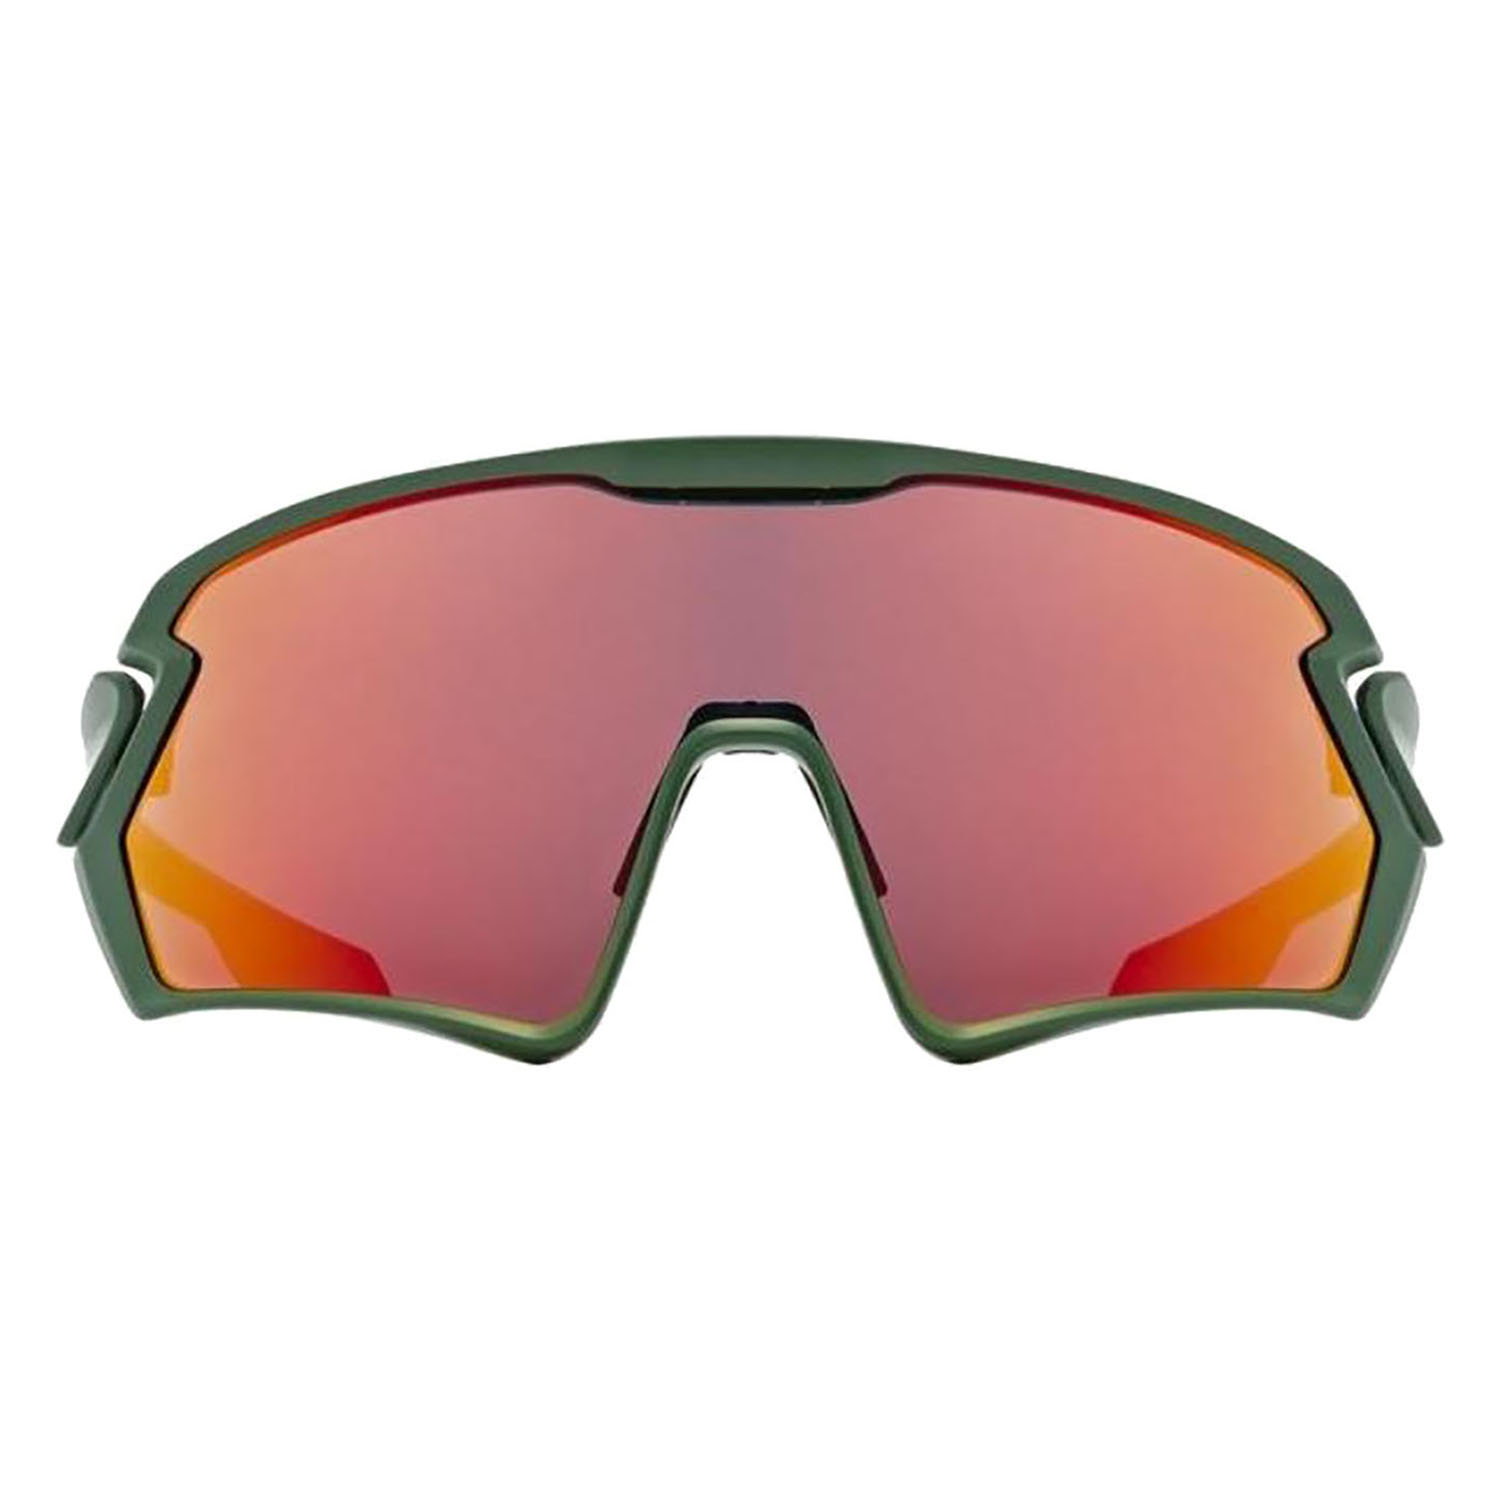 Очки солнцезащитные UVEX Sportstyle 231 forest m./mir.red Forest M./Mir.Red